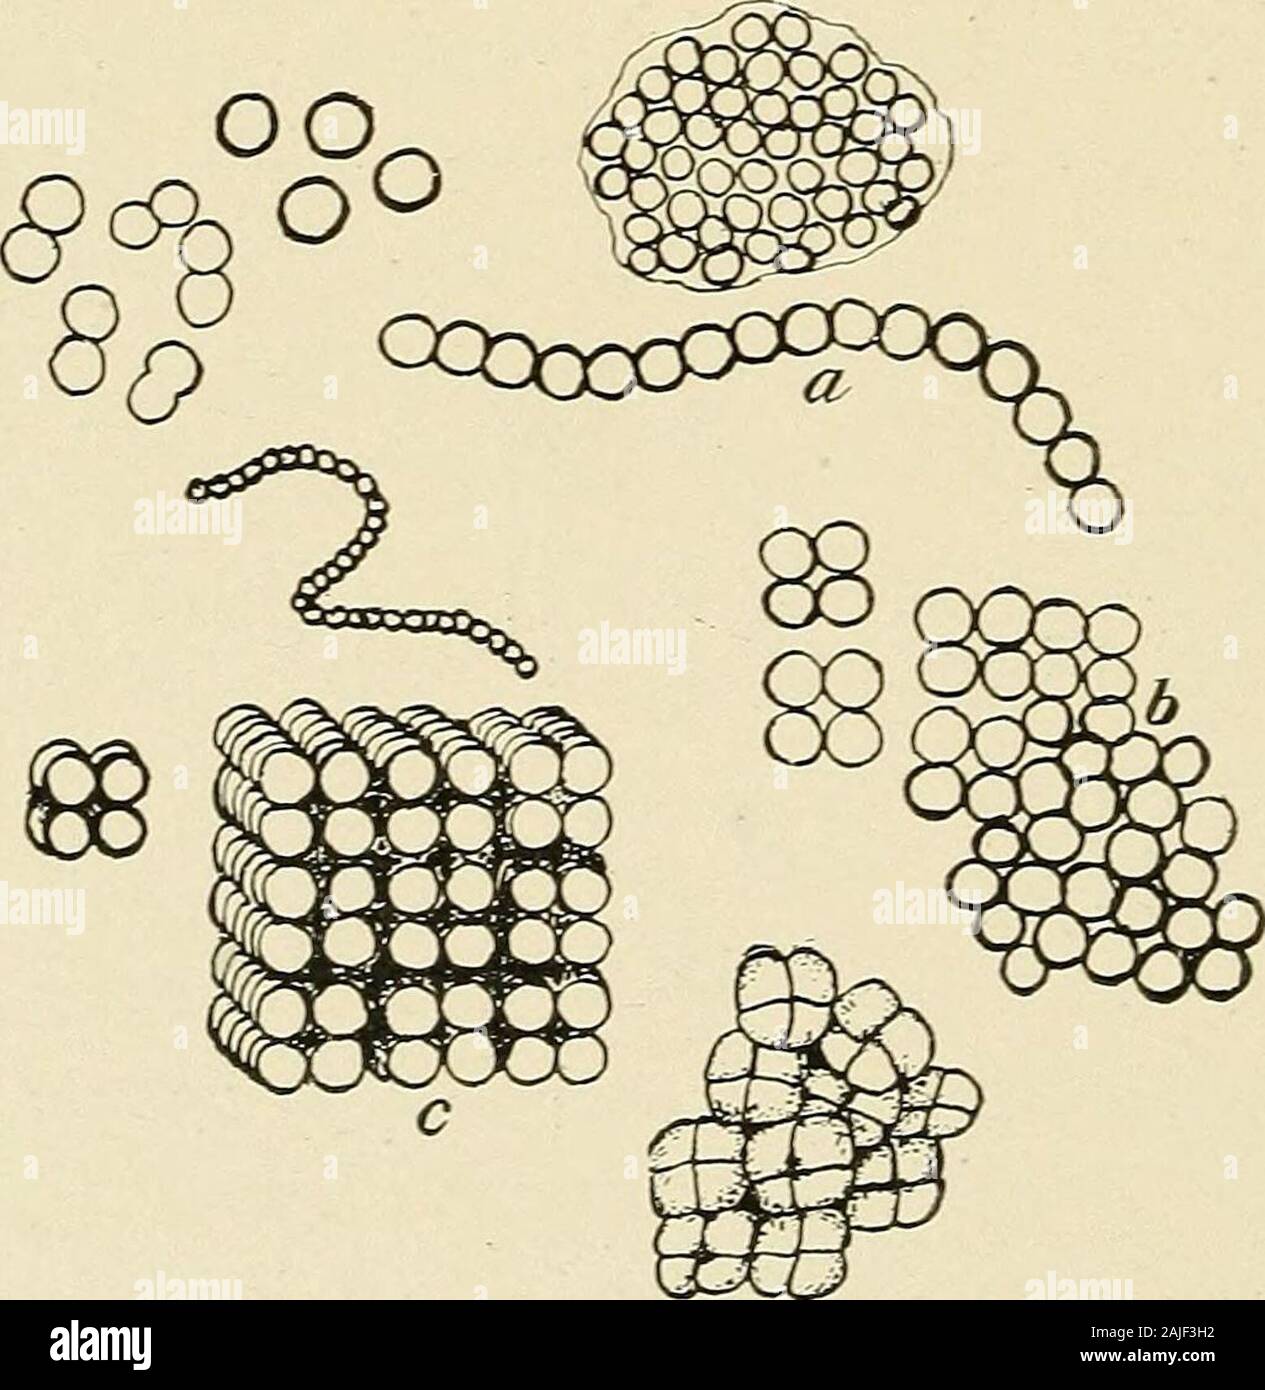 The theory and practice of infant feeding, with notes on development . #° Fig. 14.—a, Spheres; 6, rods; c, spirals. (Conn.) Classification of Bacteria.—Bacteria are divided ac-cording to their form into three groups: 1. Spherical bacteria—coccus. 2. Rod-shaped bacteria—bacillus and bacterium. 3. Spiral bacteria—spirillum.. Fig. 15 —a, Streptococcus; £•, micrococcus : c, sarcina. (Conn.) Spherical bacteria are further classified according tothe way in which they group themselves .during the proc- BACTERIOLOGY OF MILK. 83 ess of division, as streptococcus, in chains; micrococcus,in irregular mas Stock Photo